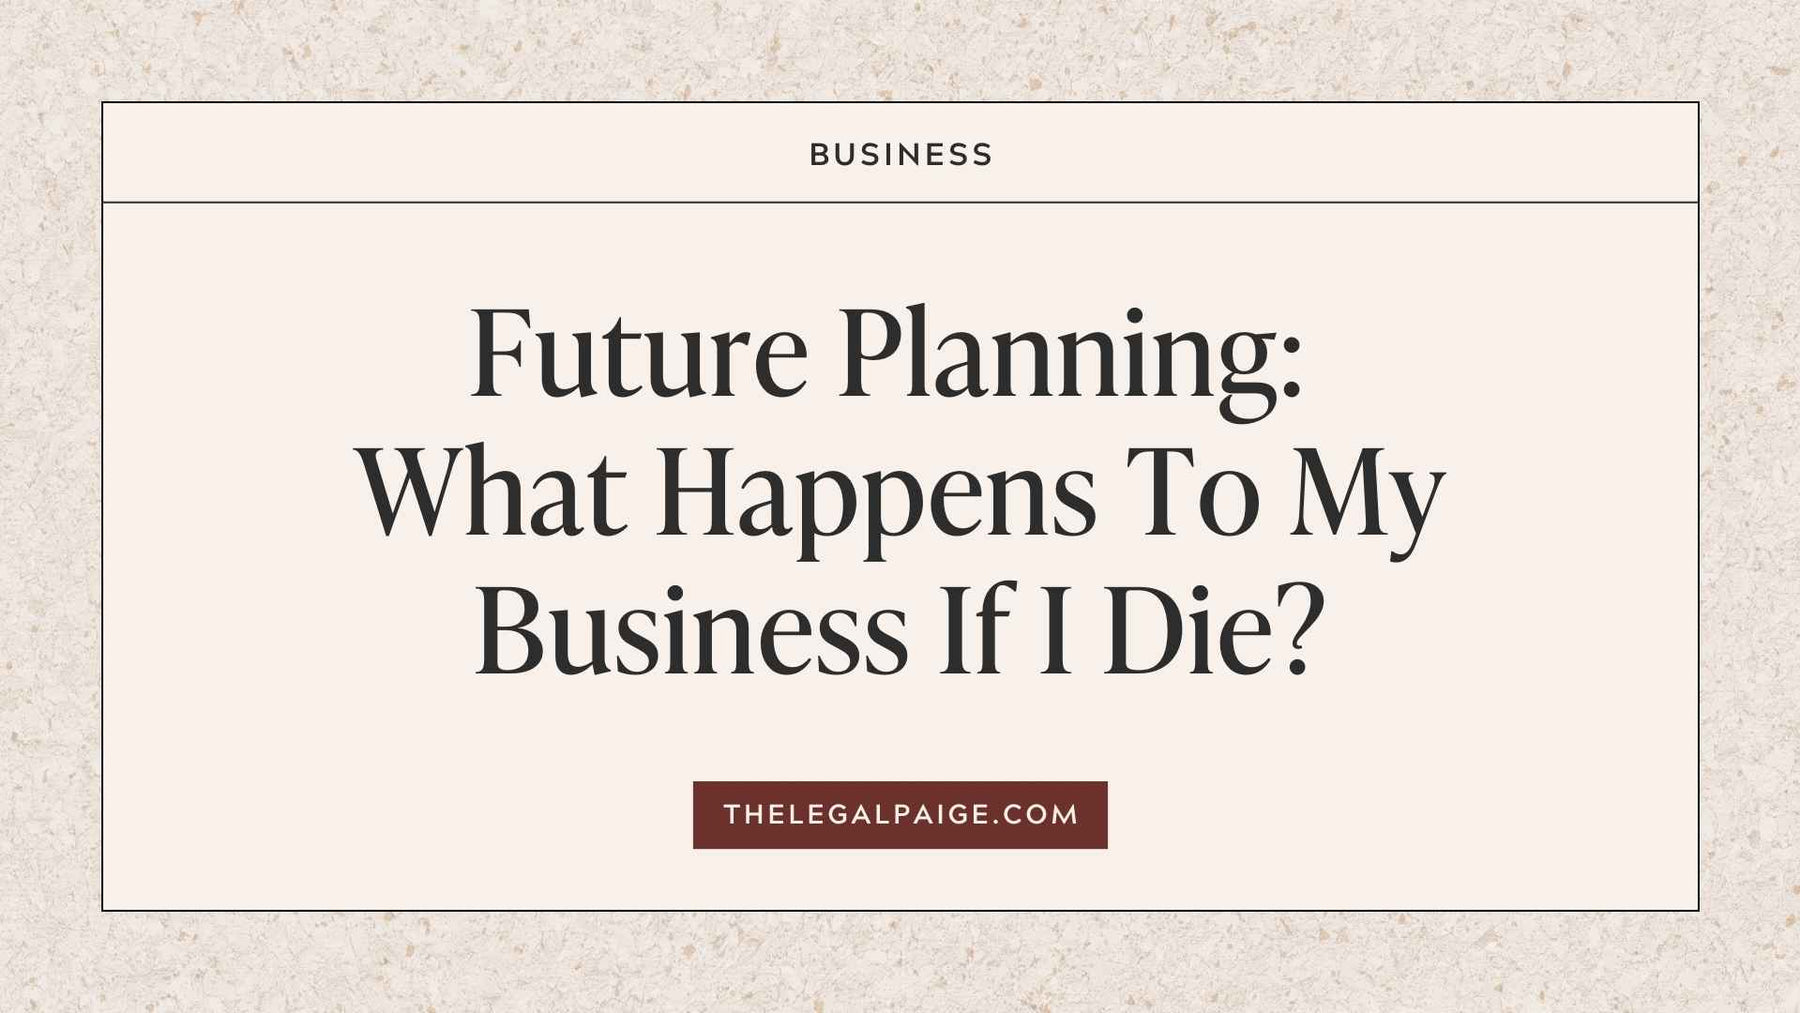 Future Planning: What Happens To My Business If I Die?